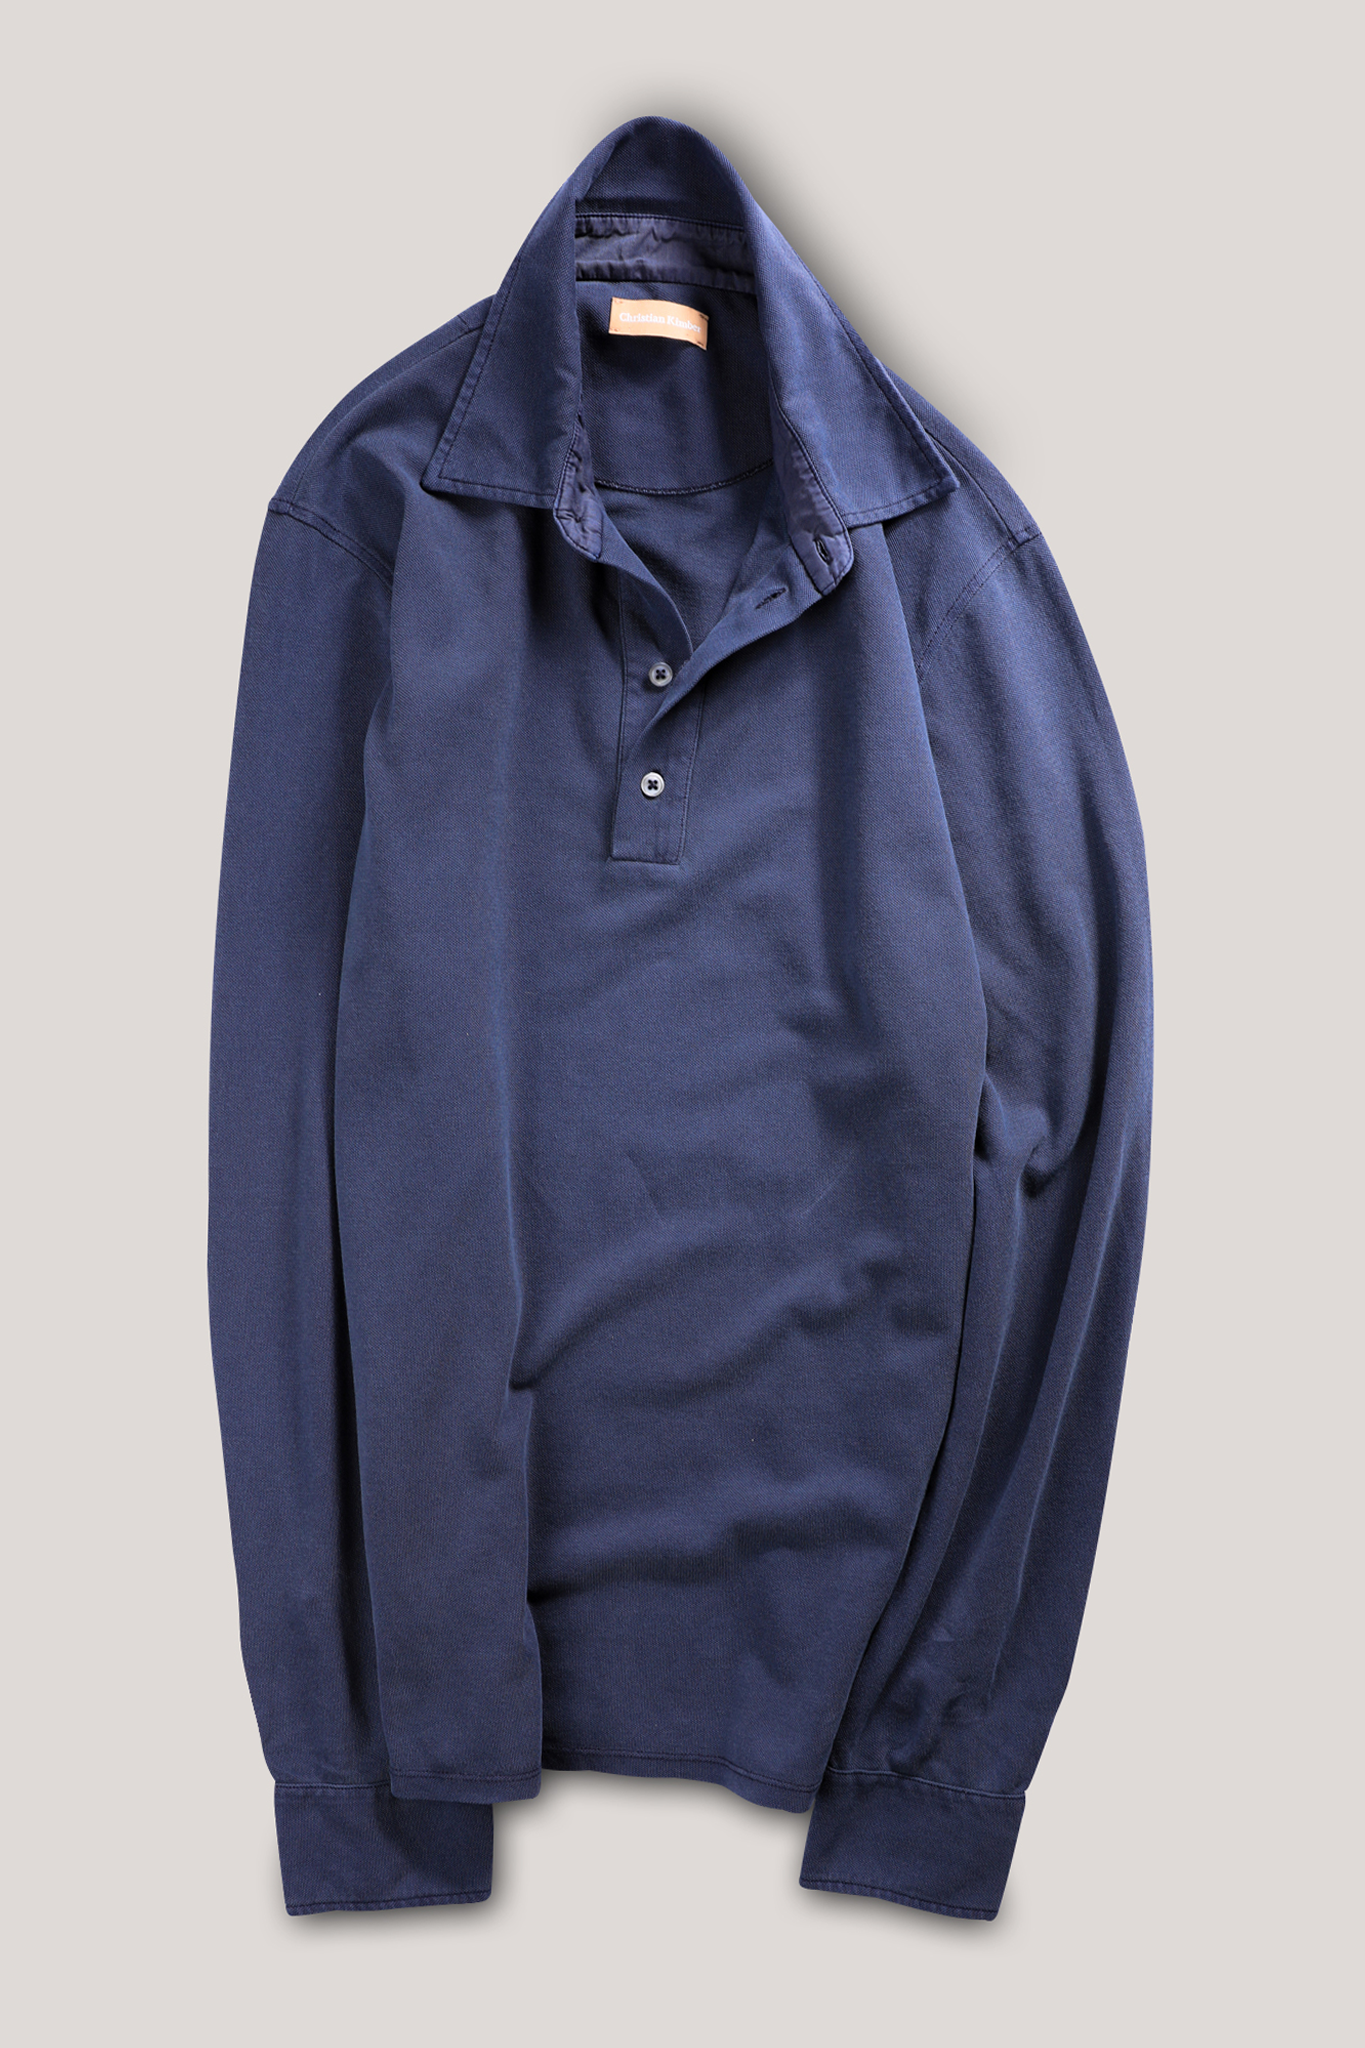 Hastings Long Sleeved Polo - Garment-Dyed Blue